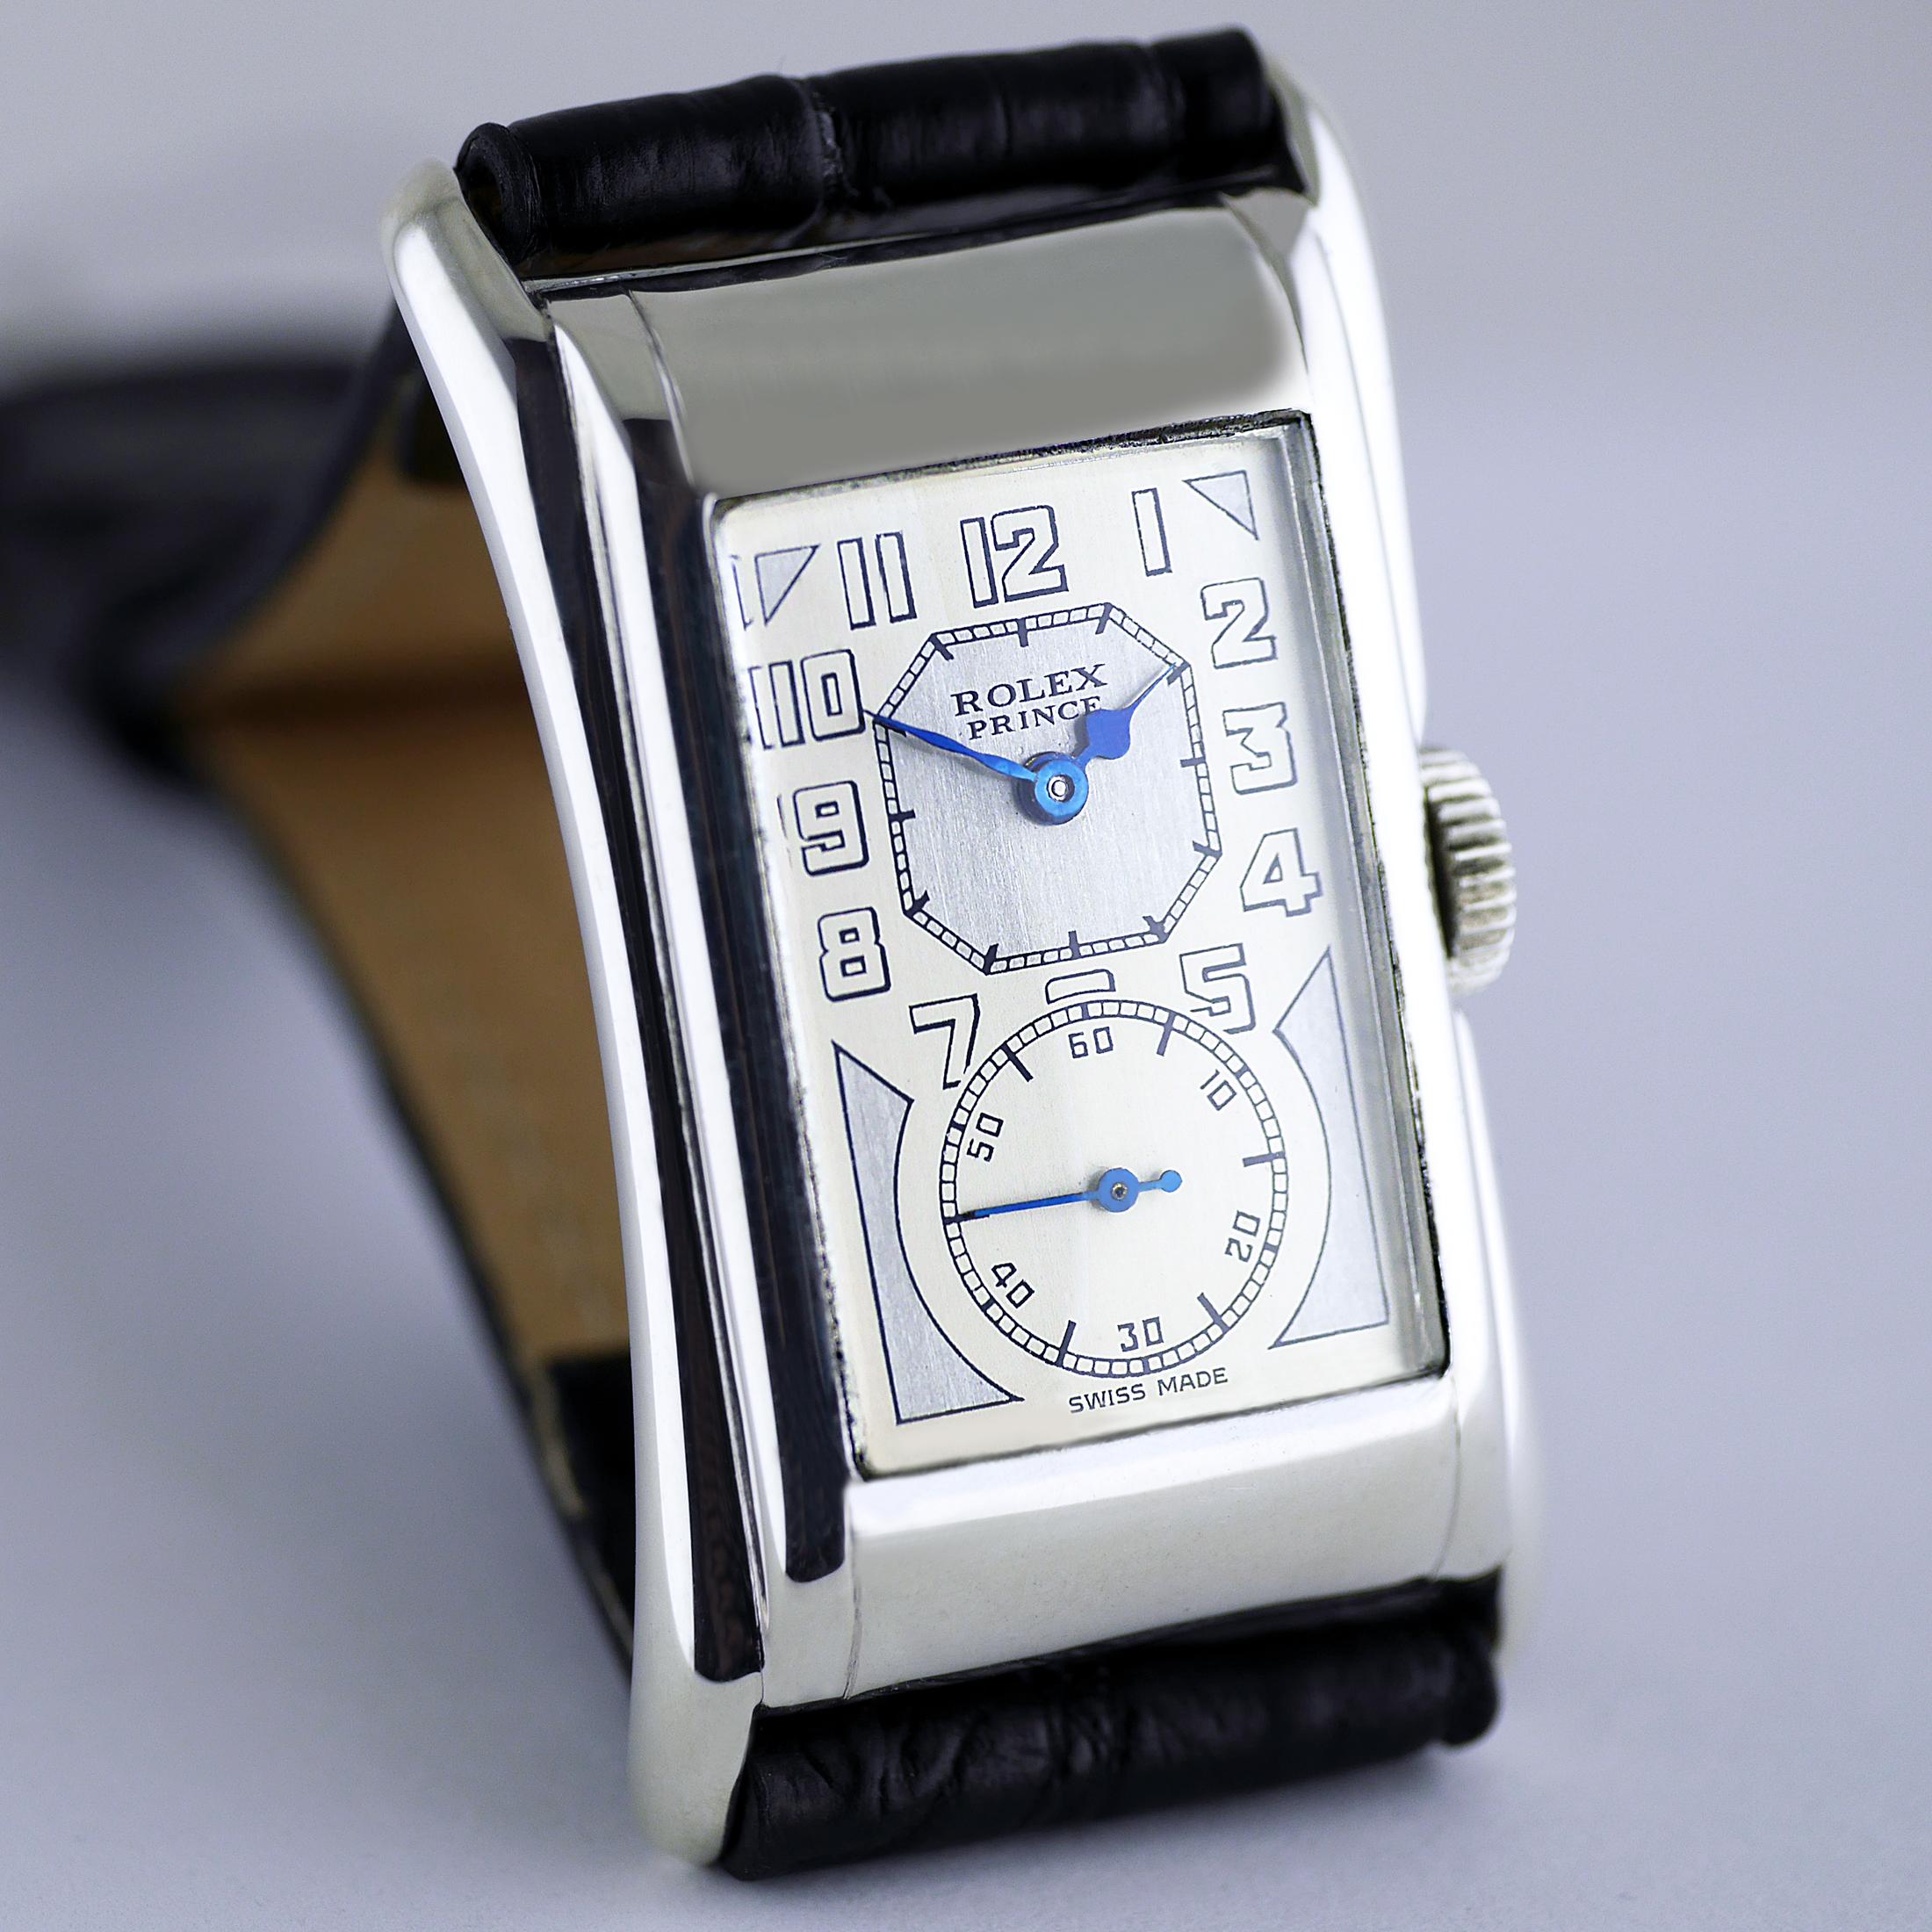 A very rare, fine and well-preserved Art Deco vintage wristwatch in silver by Rolex made in 1929. One of the very first Rolex Prince models made in its launch year.

“The Rolex Prince the watch for men of distinction”

If there was ever an accessory